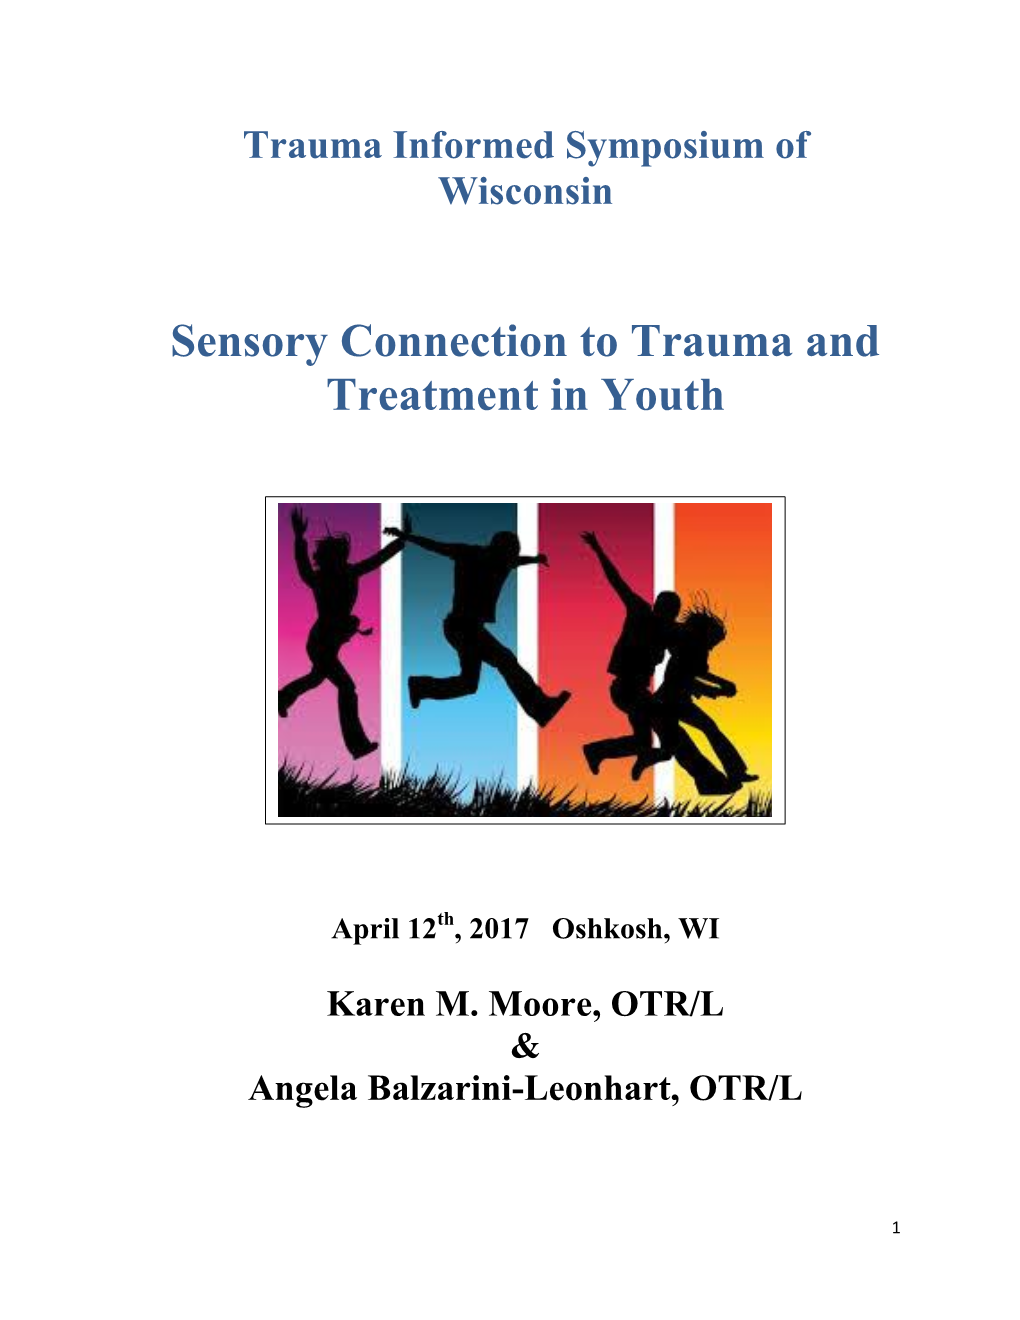 Sensory Connection to Trauma and Treatment in Youth